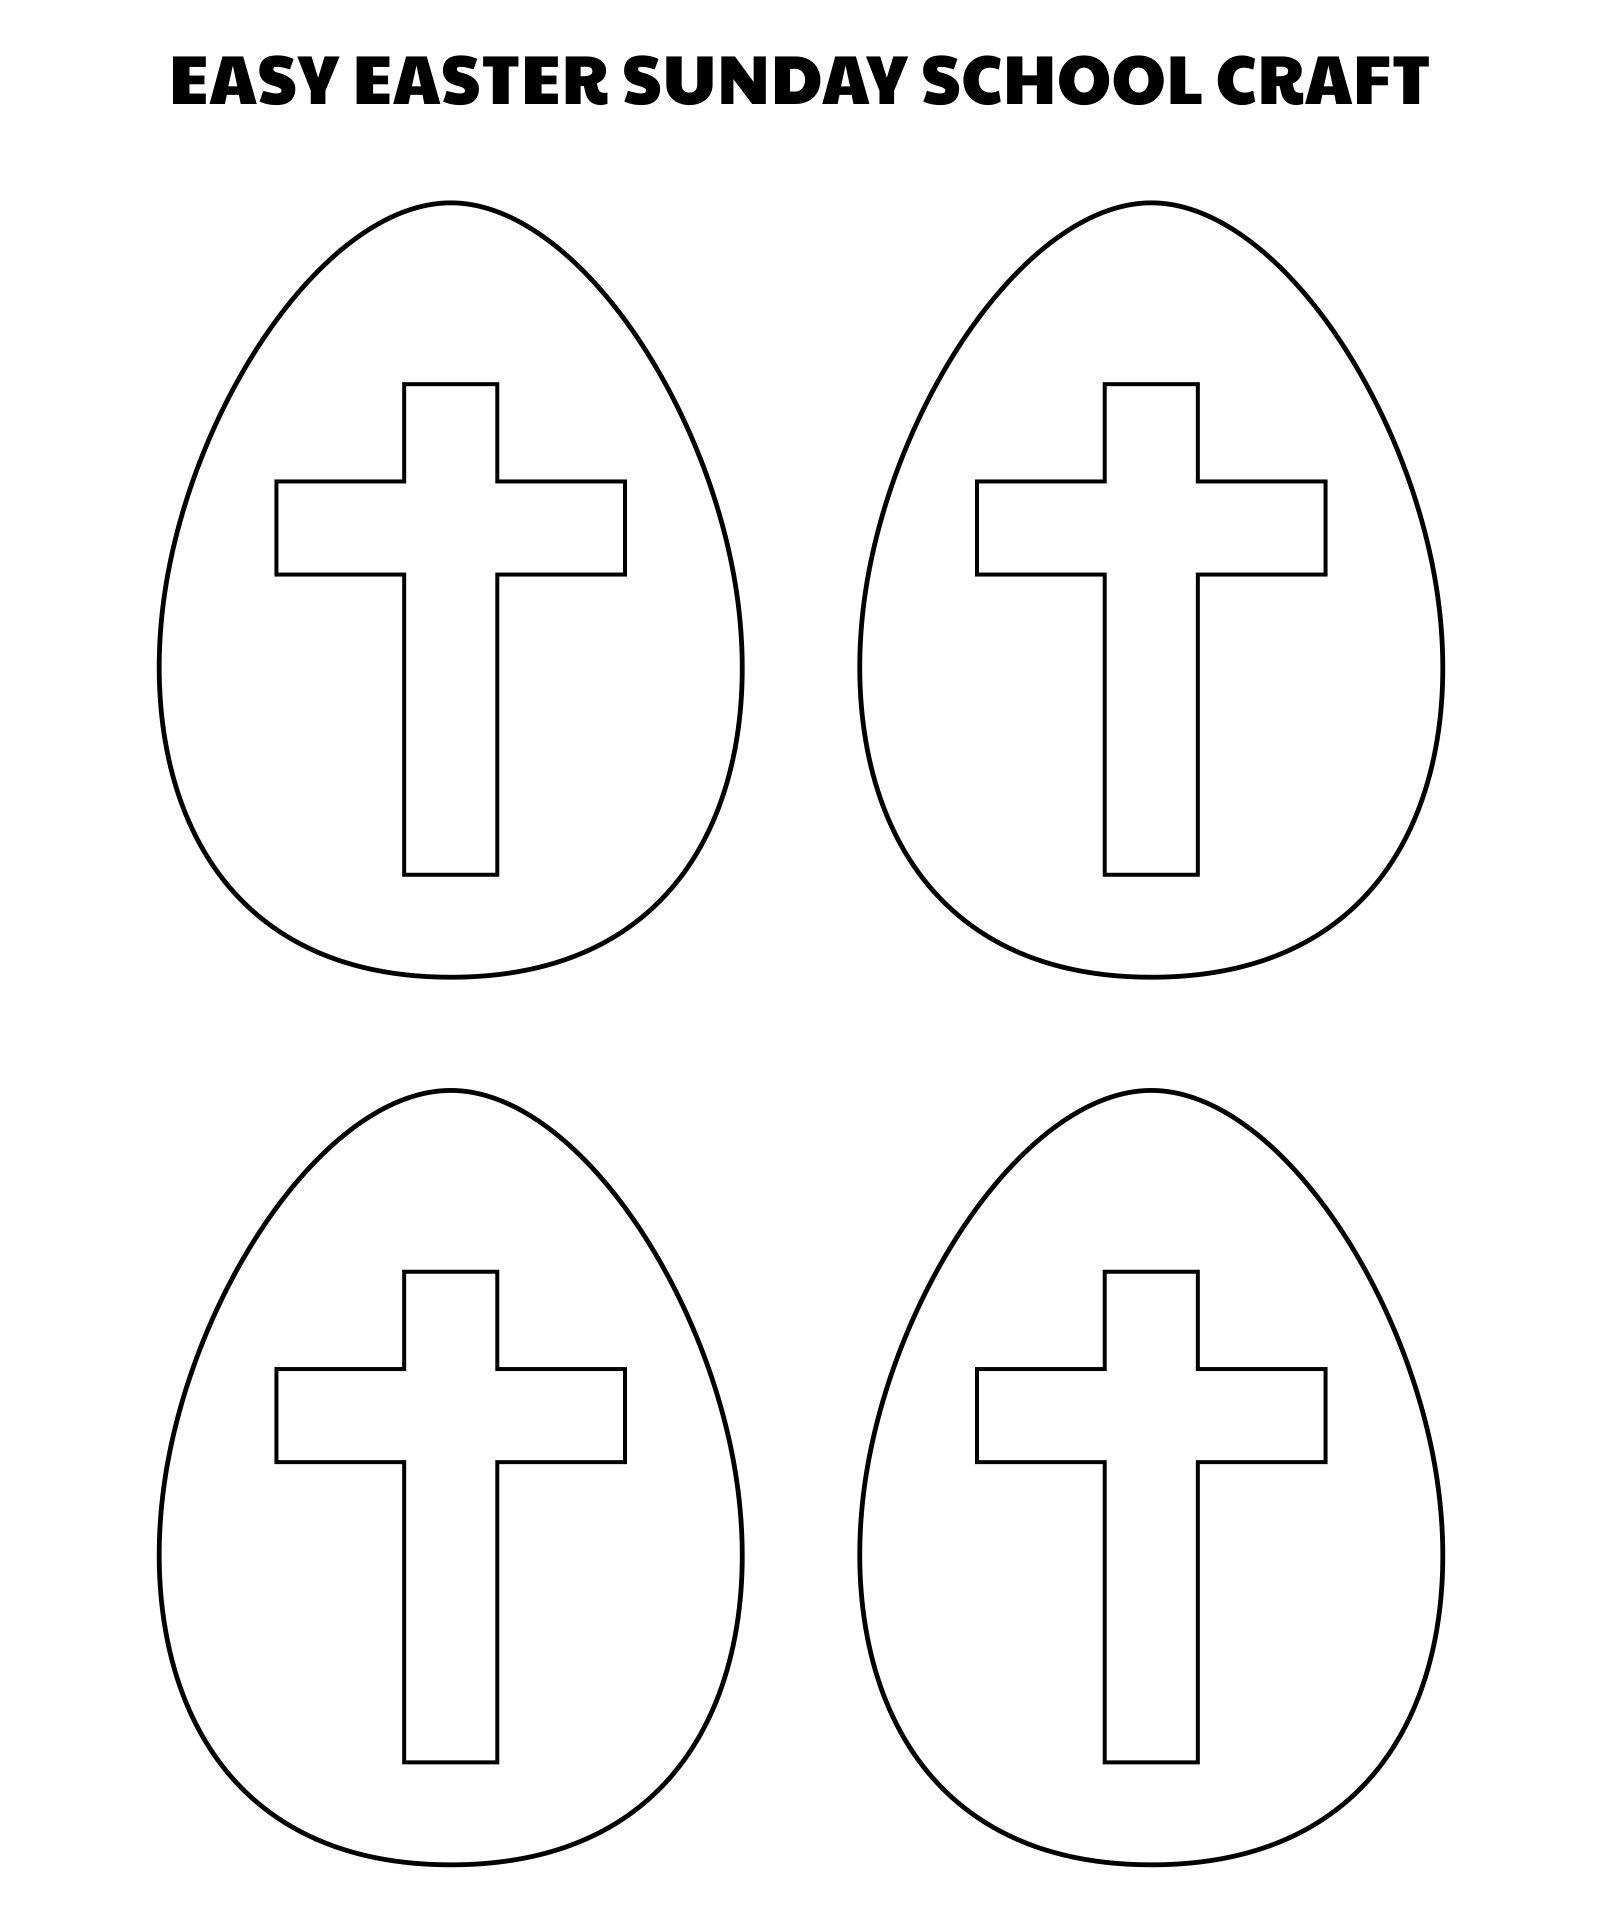 Printable Easter Sunday School Crafts Templates